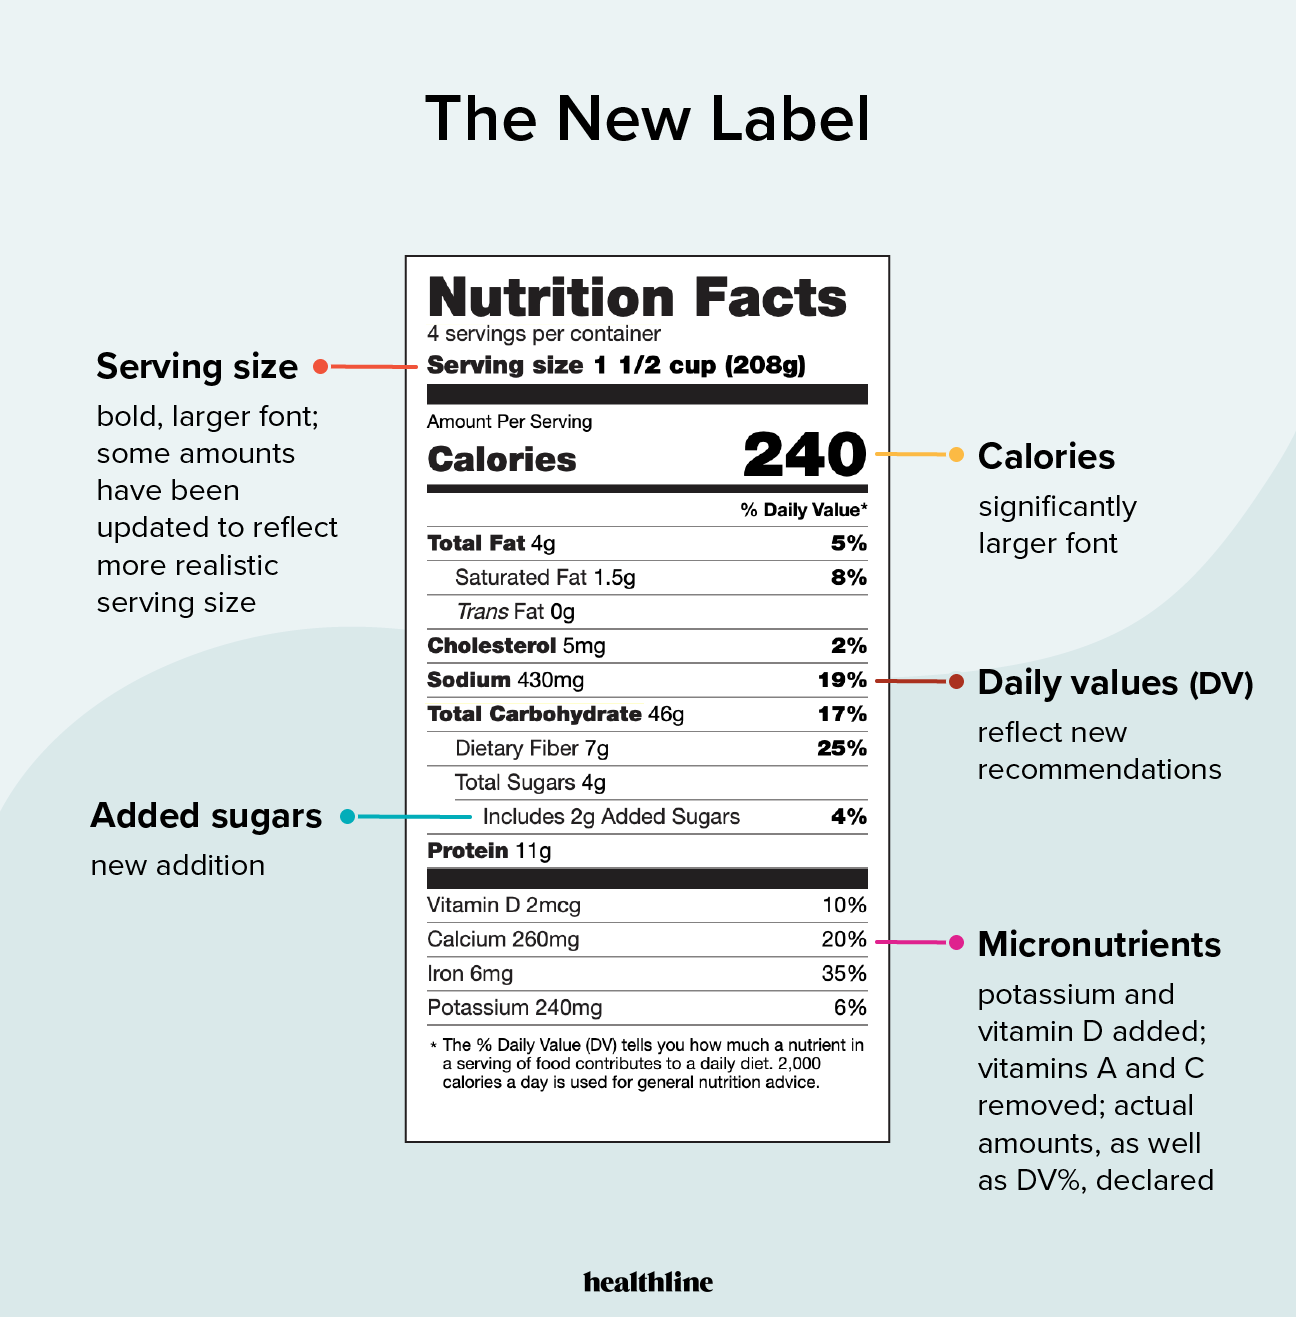 New Nutrition Facts Label in 2020 Changes and What to Know